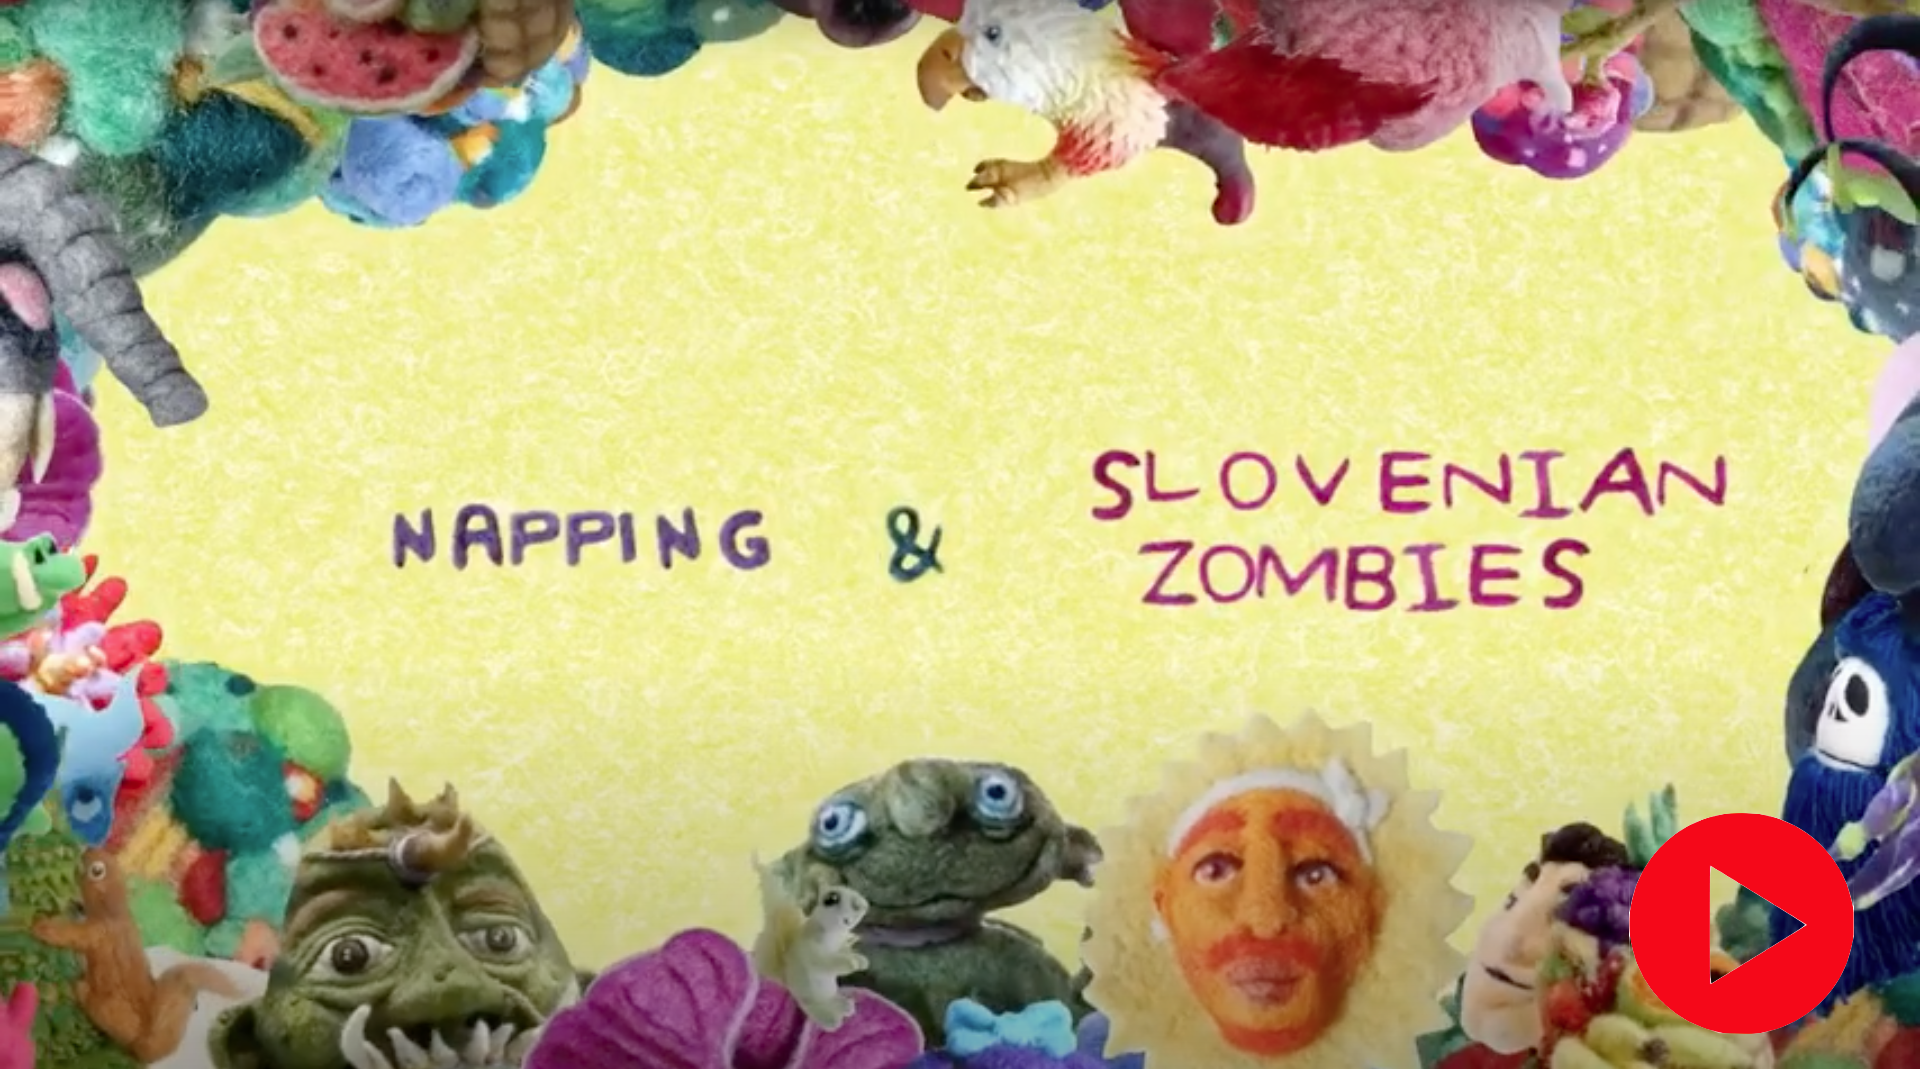 Watch Napping & Slovenian Zombies